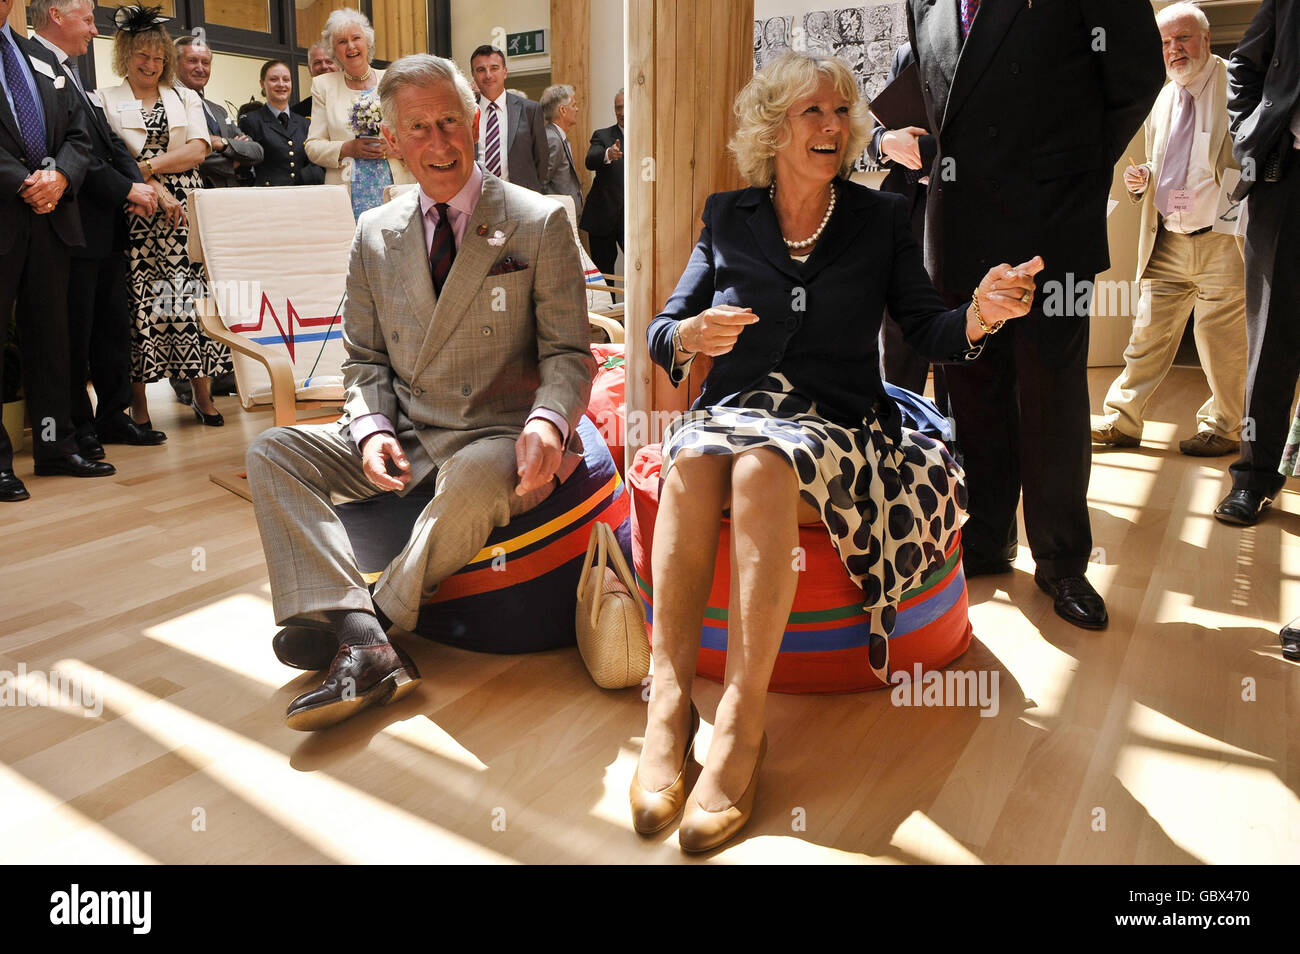 The Prince of Wales and the Duchess of Cornwall sit on bean bags at the Integrated Health Centre before listening to a presentation from pupils during their visit to Penair School, Truro, Cornwall. Stock Photo